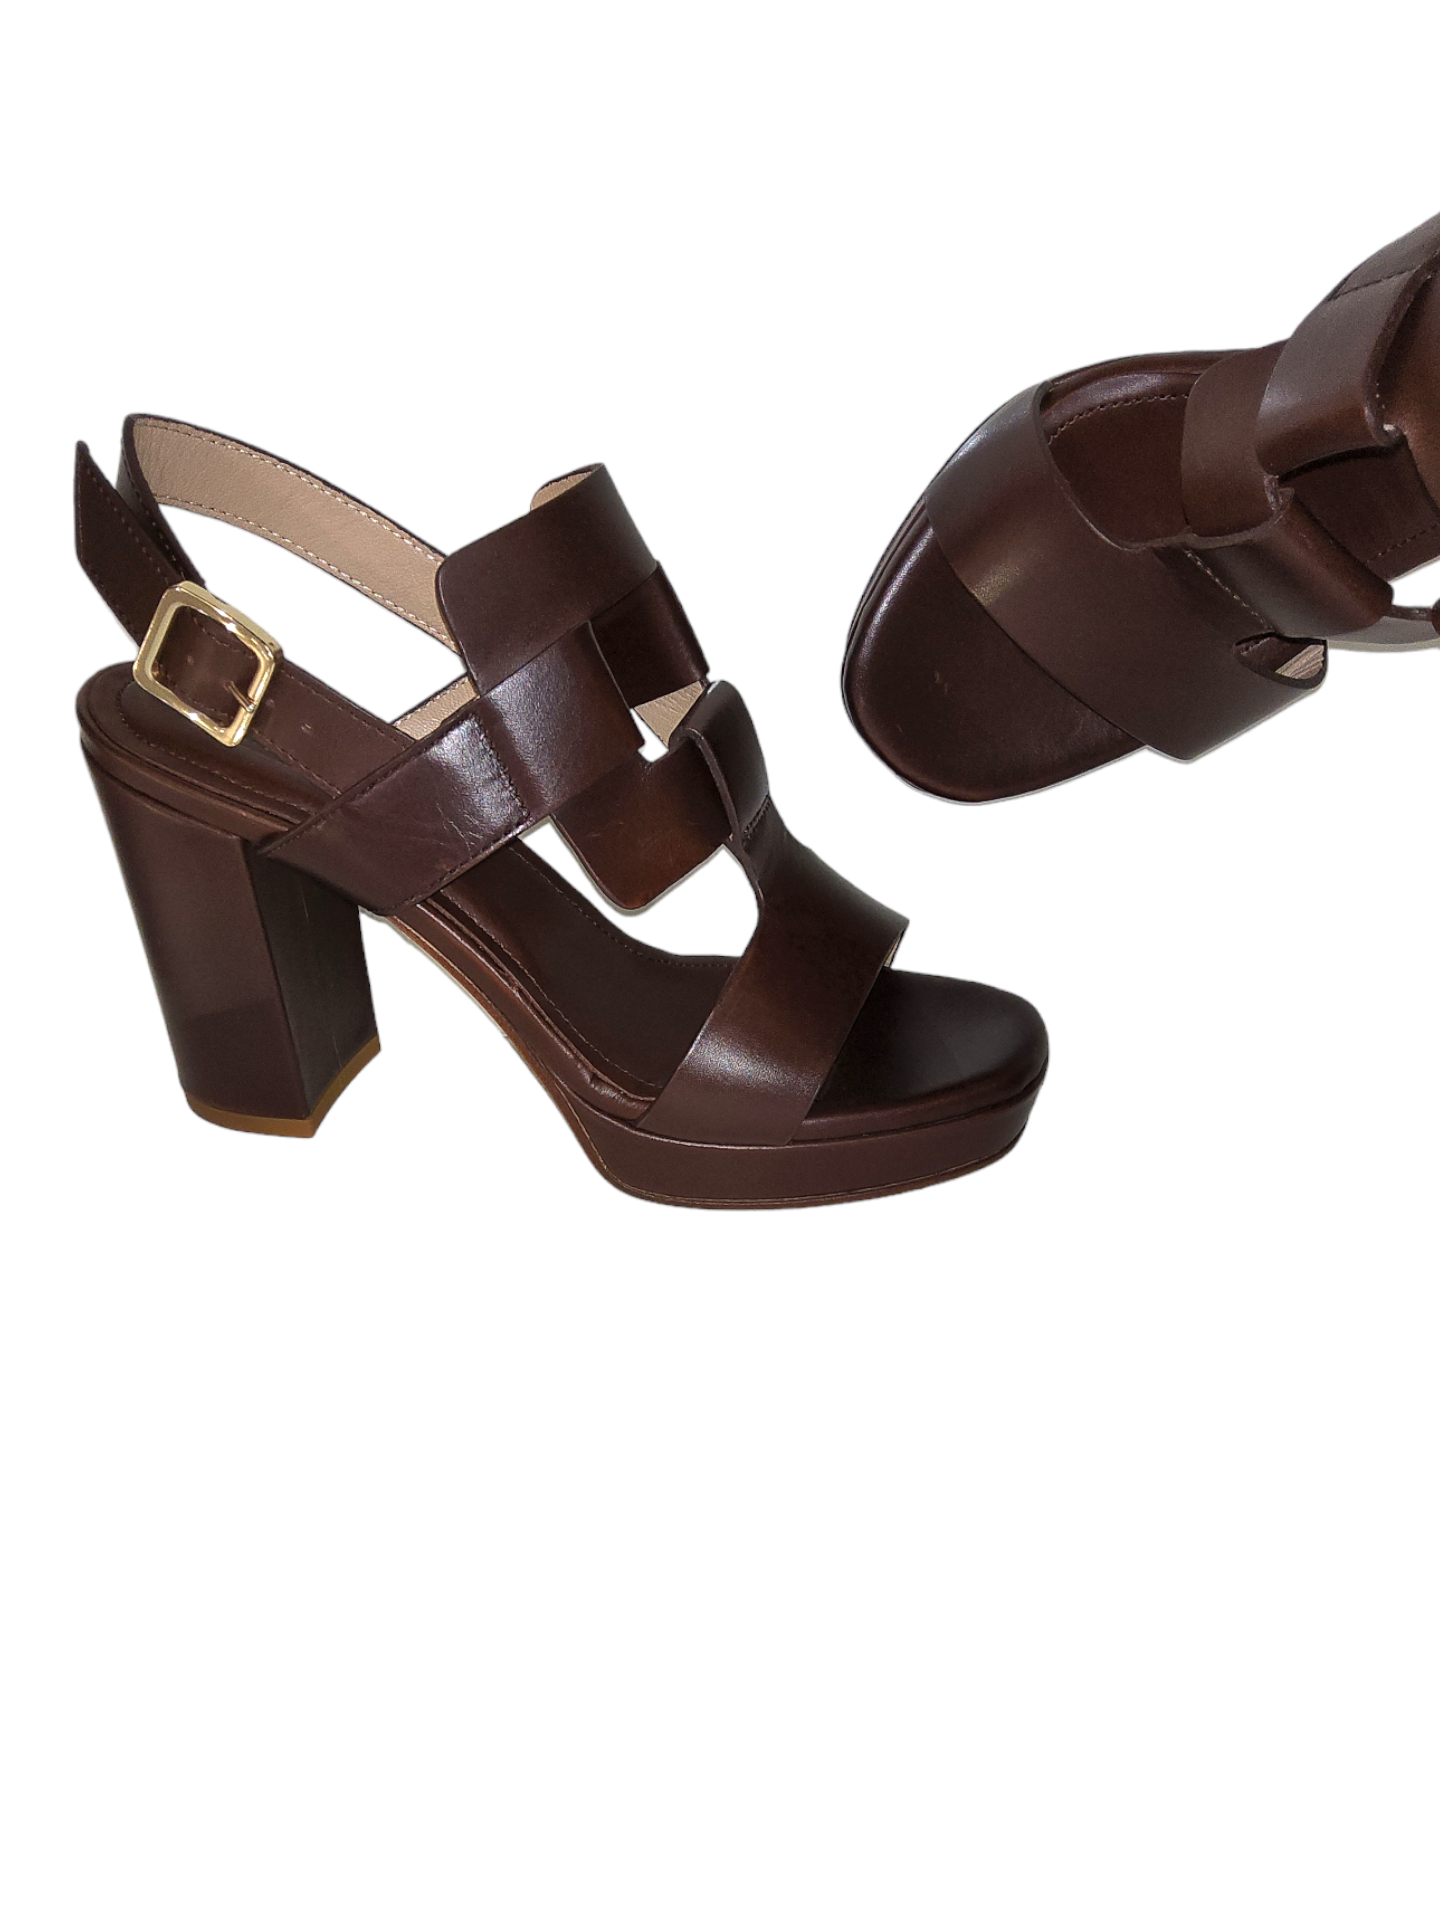 Brown leather sandals